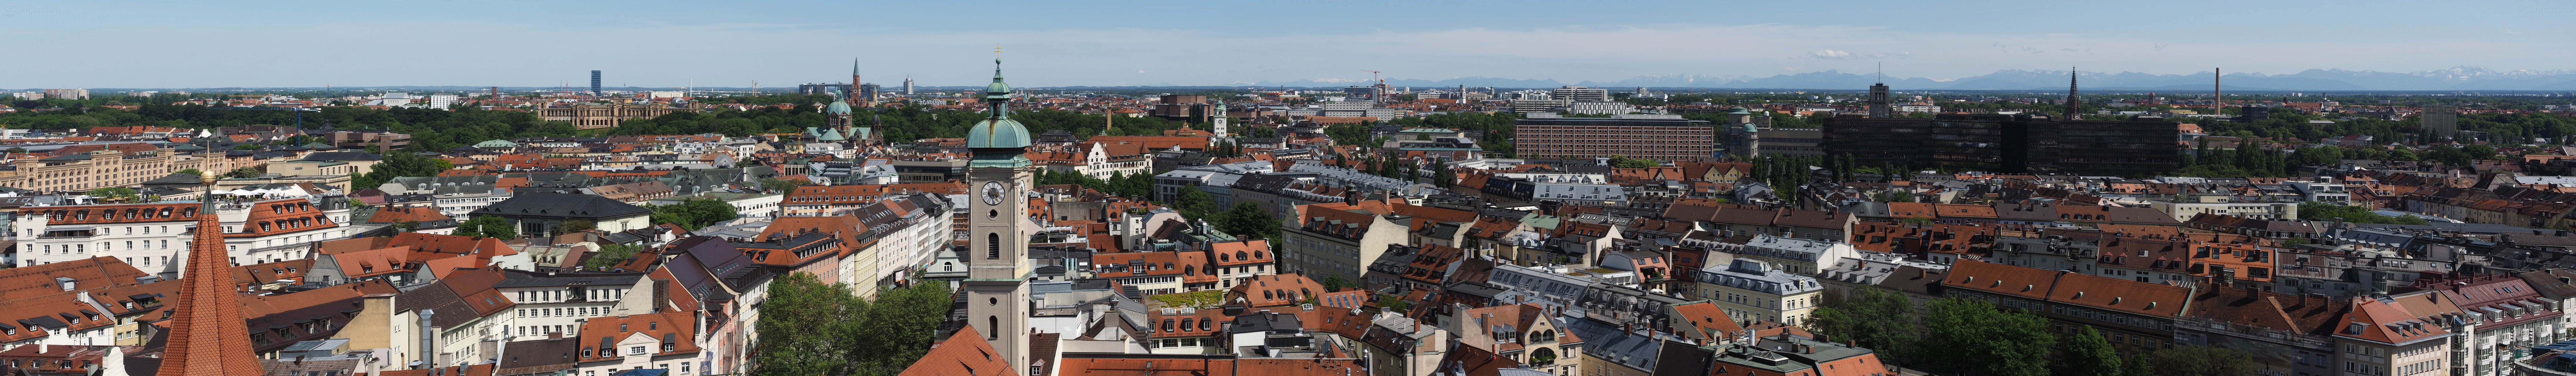 Panorama over South-East Munich